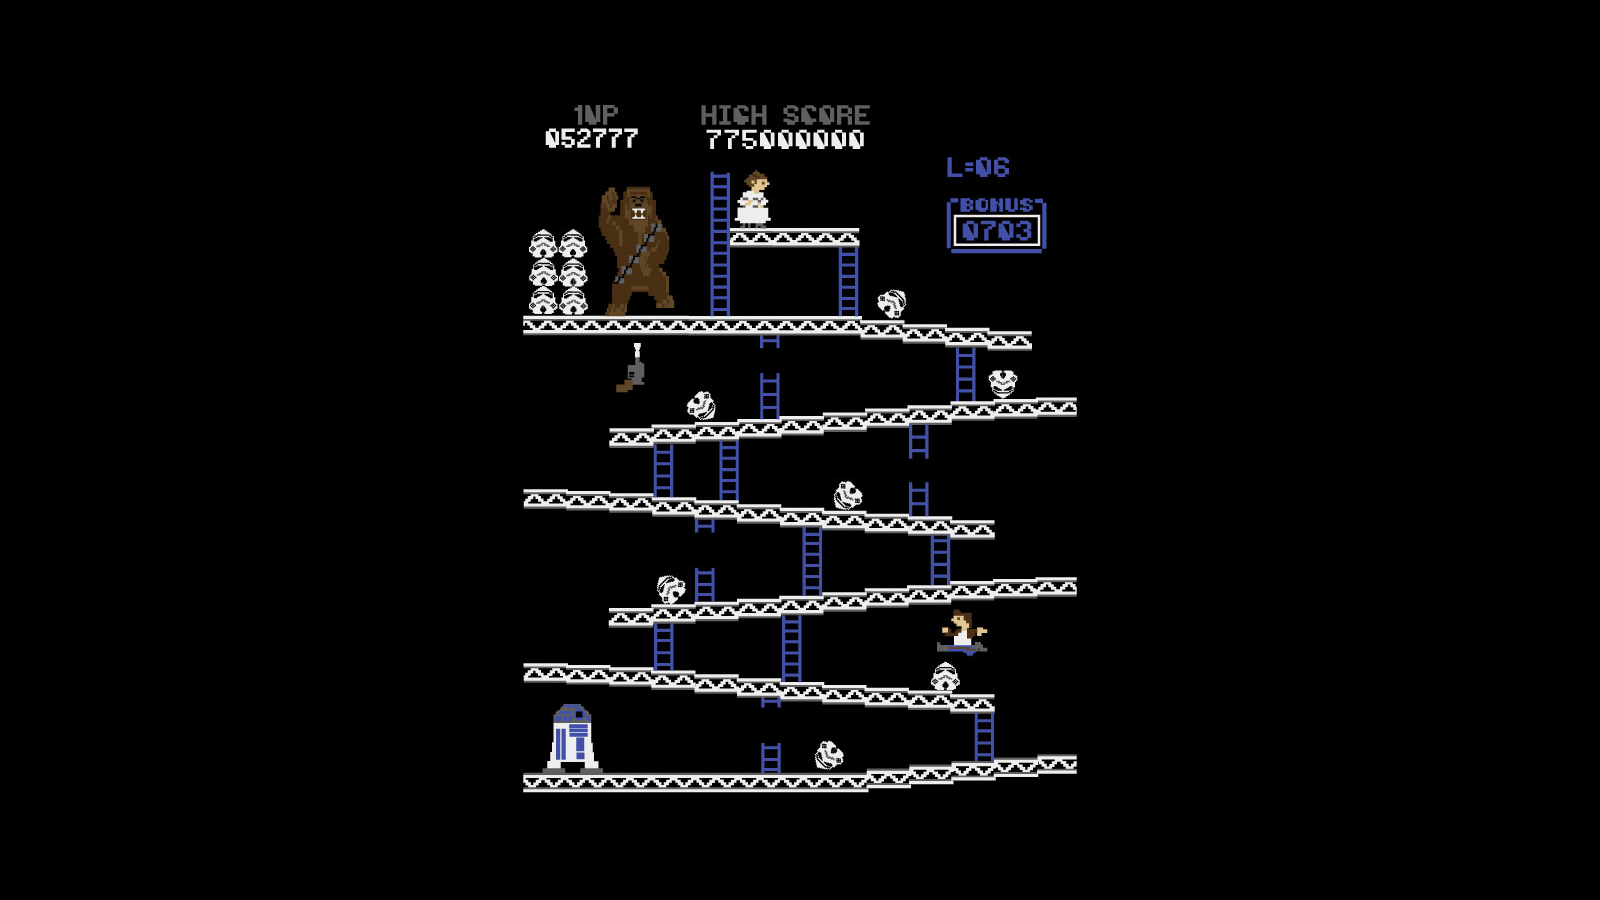 Donkey Kong Star Wars Princess Leia Chewbacca Stormtrooper Han Solo R2 D2 Crossover 1600x900